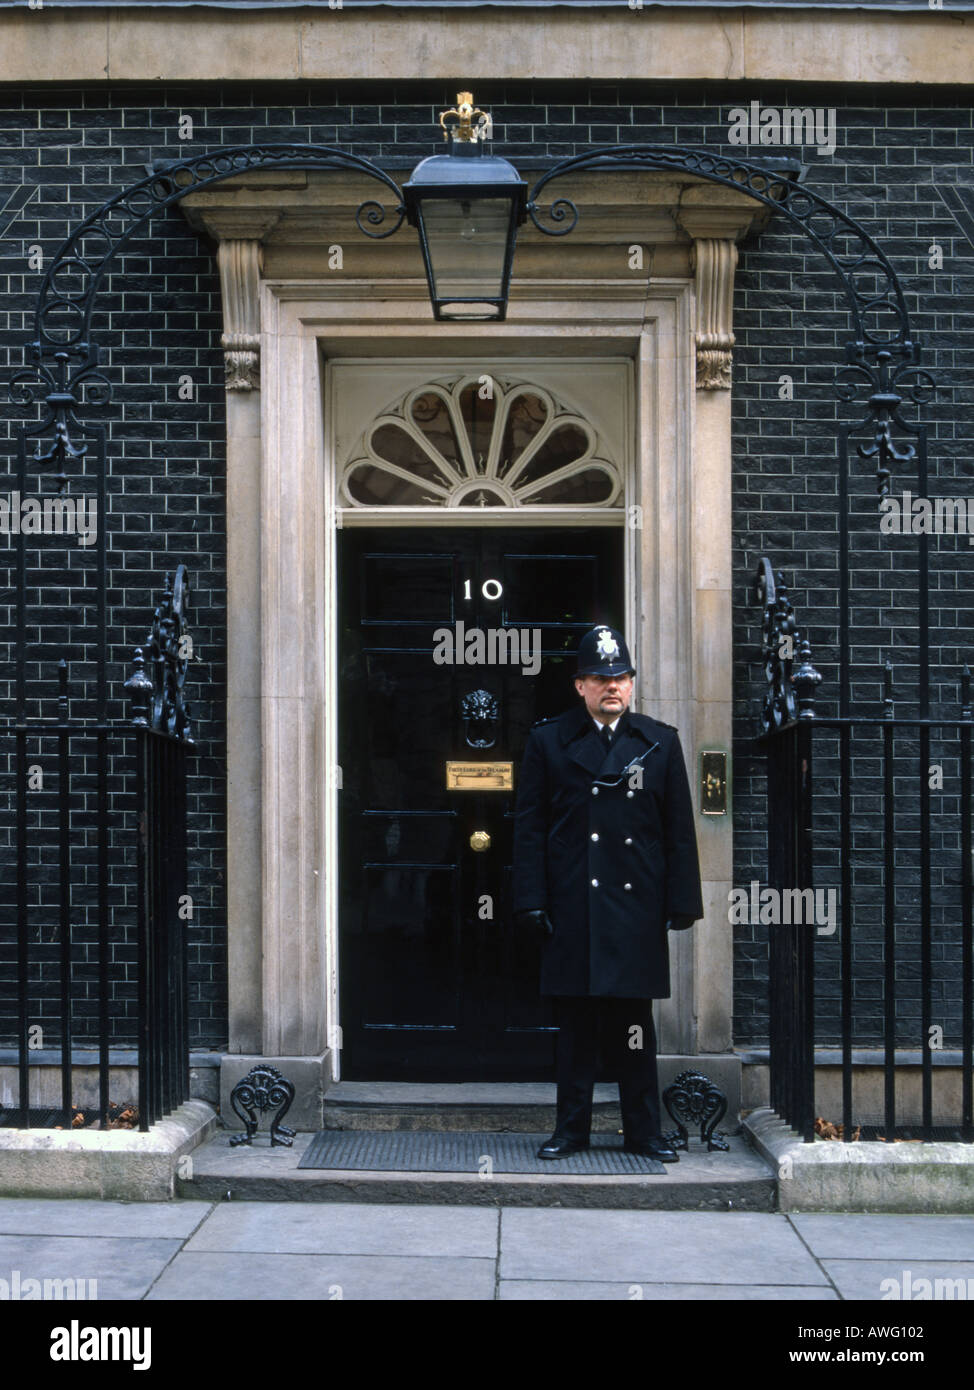 Britains most famous front door 10 downing st Stock Photo